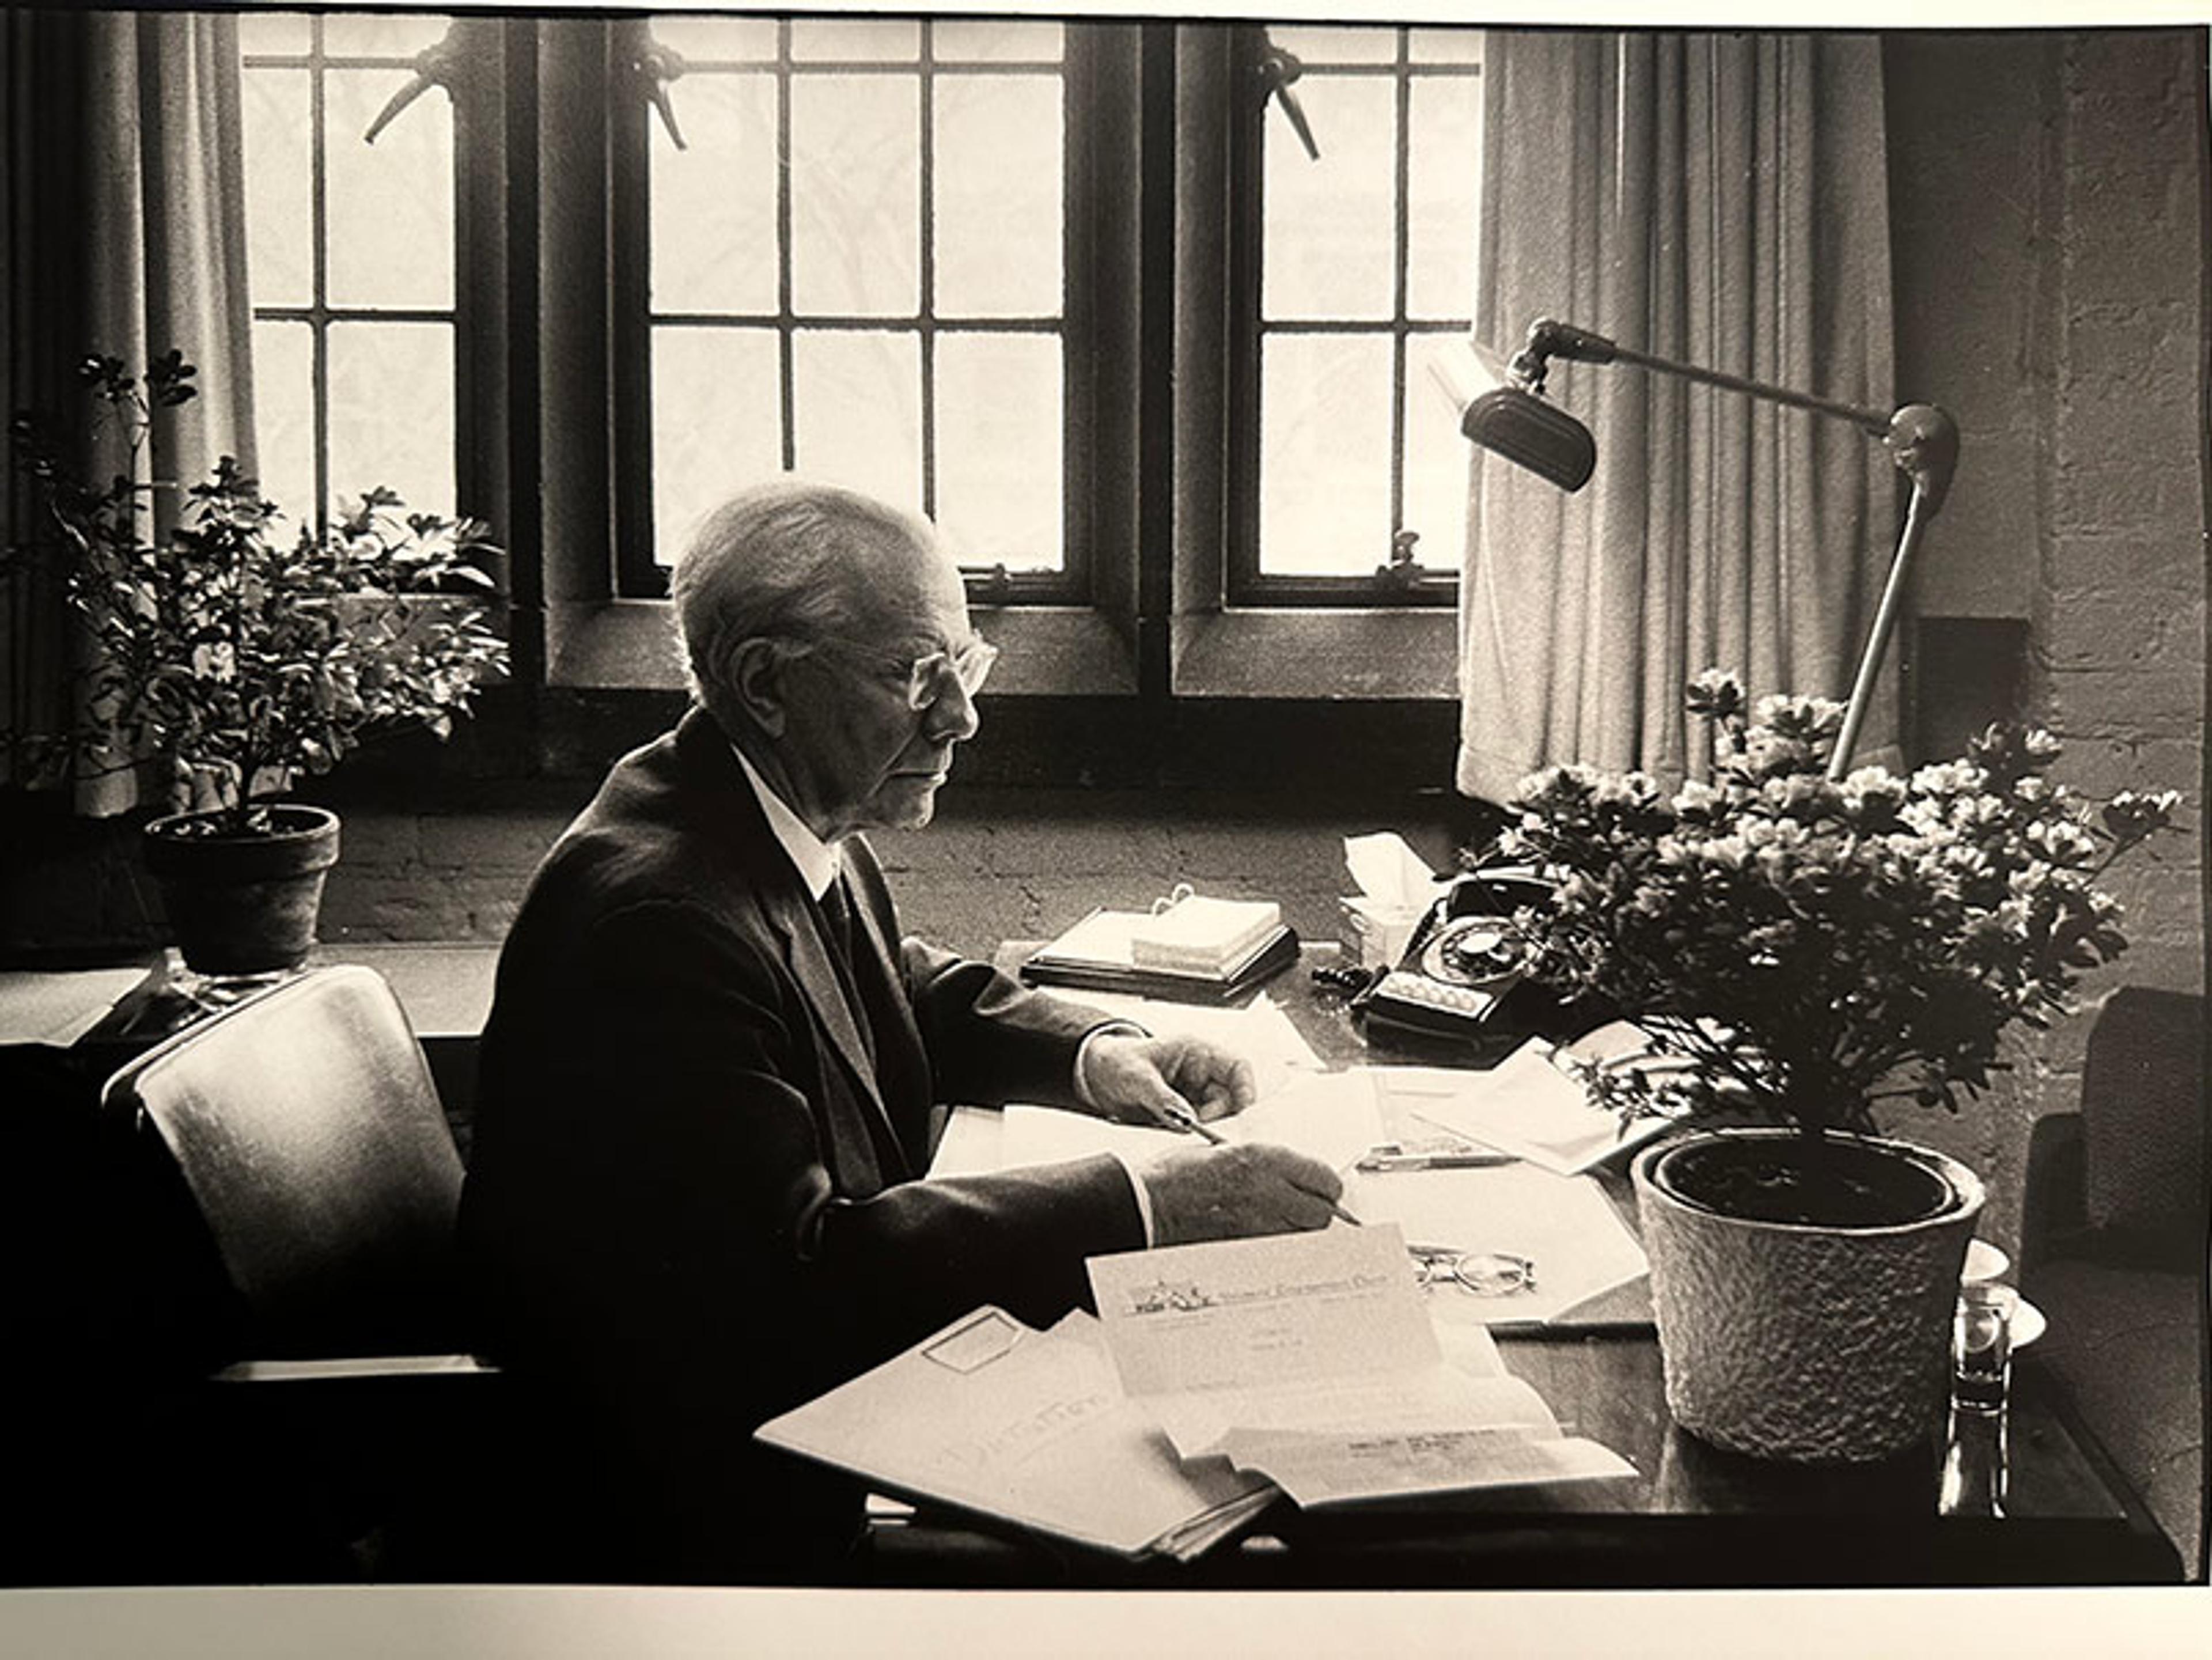 Black and white image of an elderly man in a suit, sitting at a desk covered with papers, beside a potted plant. He is writing or reading a document. Behind him, large paned windows let in light. A desk lamp, telephone, and additional paperwork are also visible on the desk.